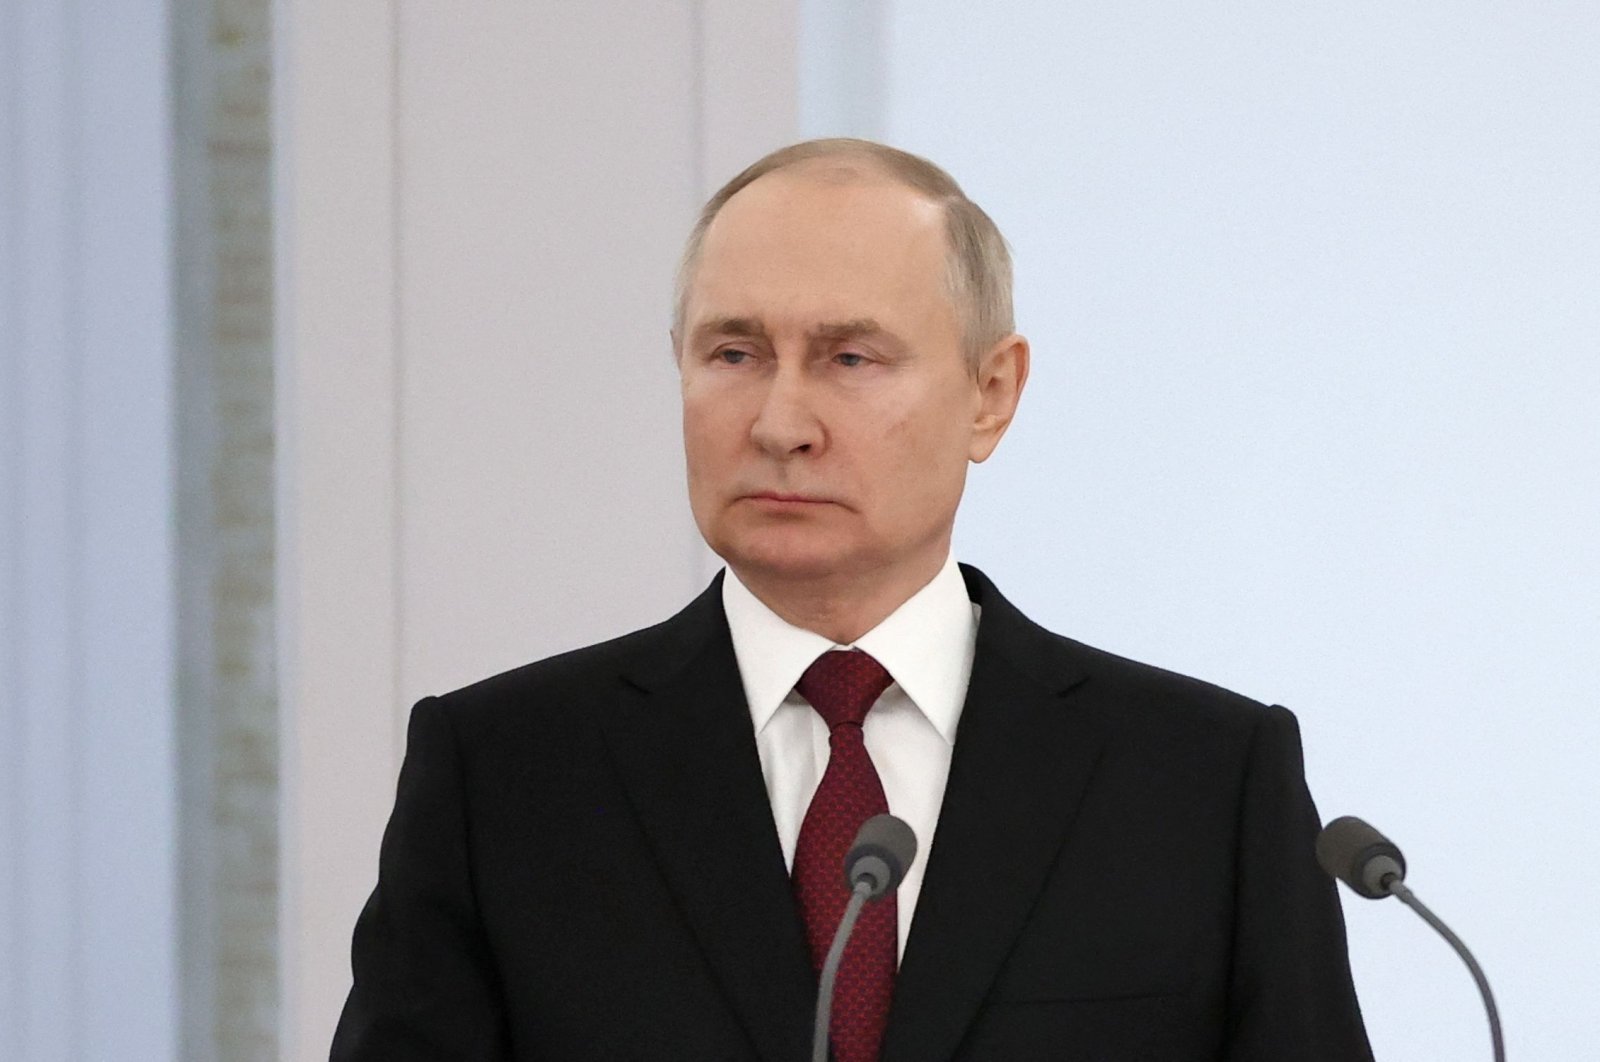 Russian President Vladimir Putin attends a ceremony in Moscow, Russia, Dec. 8, 2022. (AFP Photo)